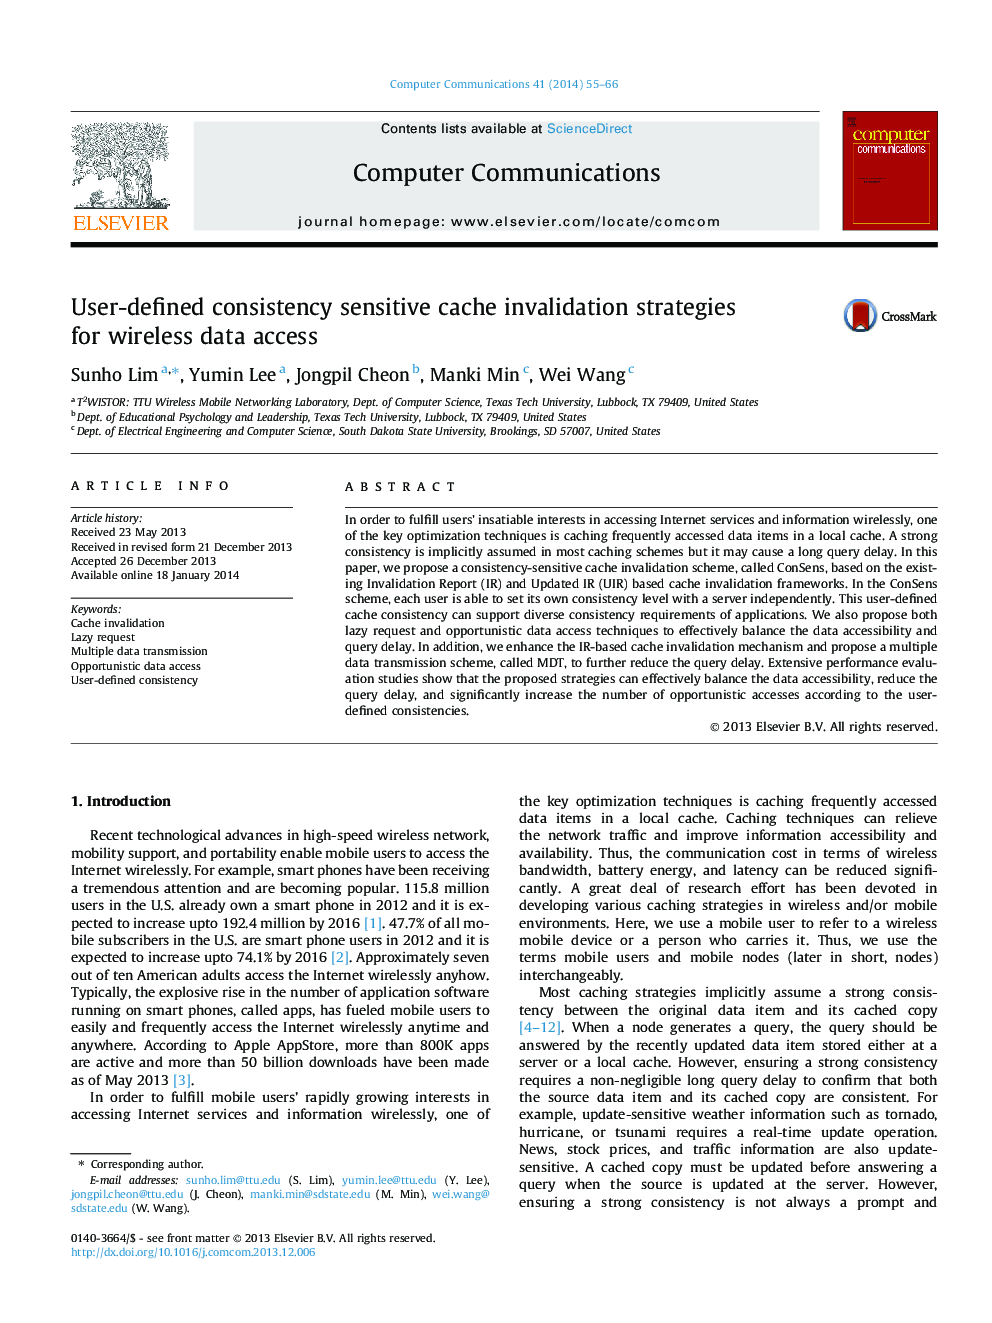 User-defined consistency sensitive cache invalidation strategies for wireless data access